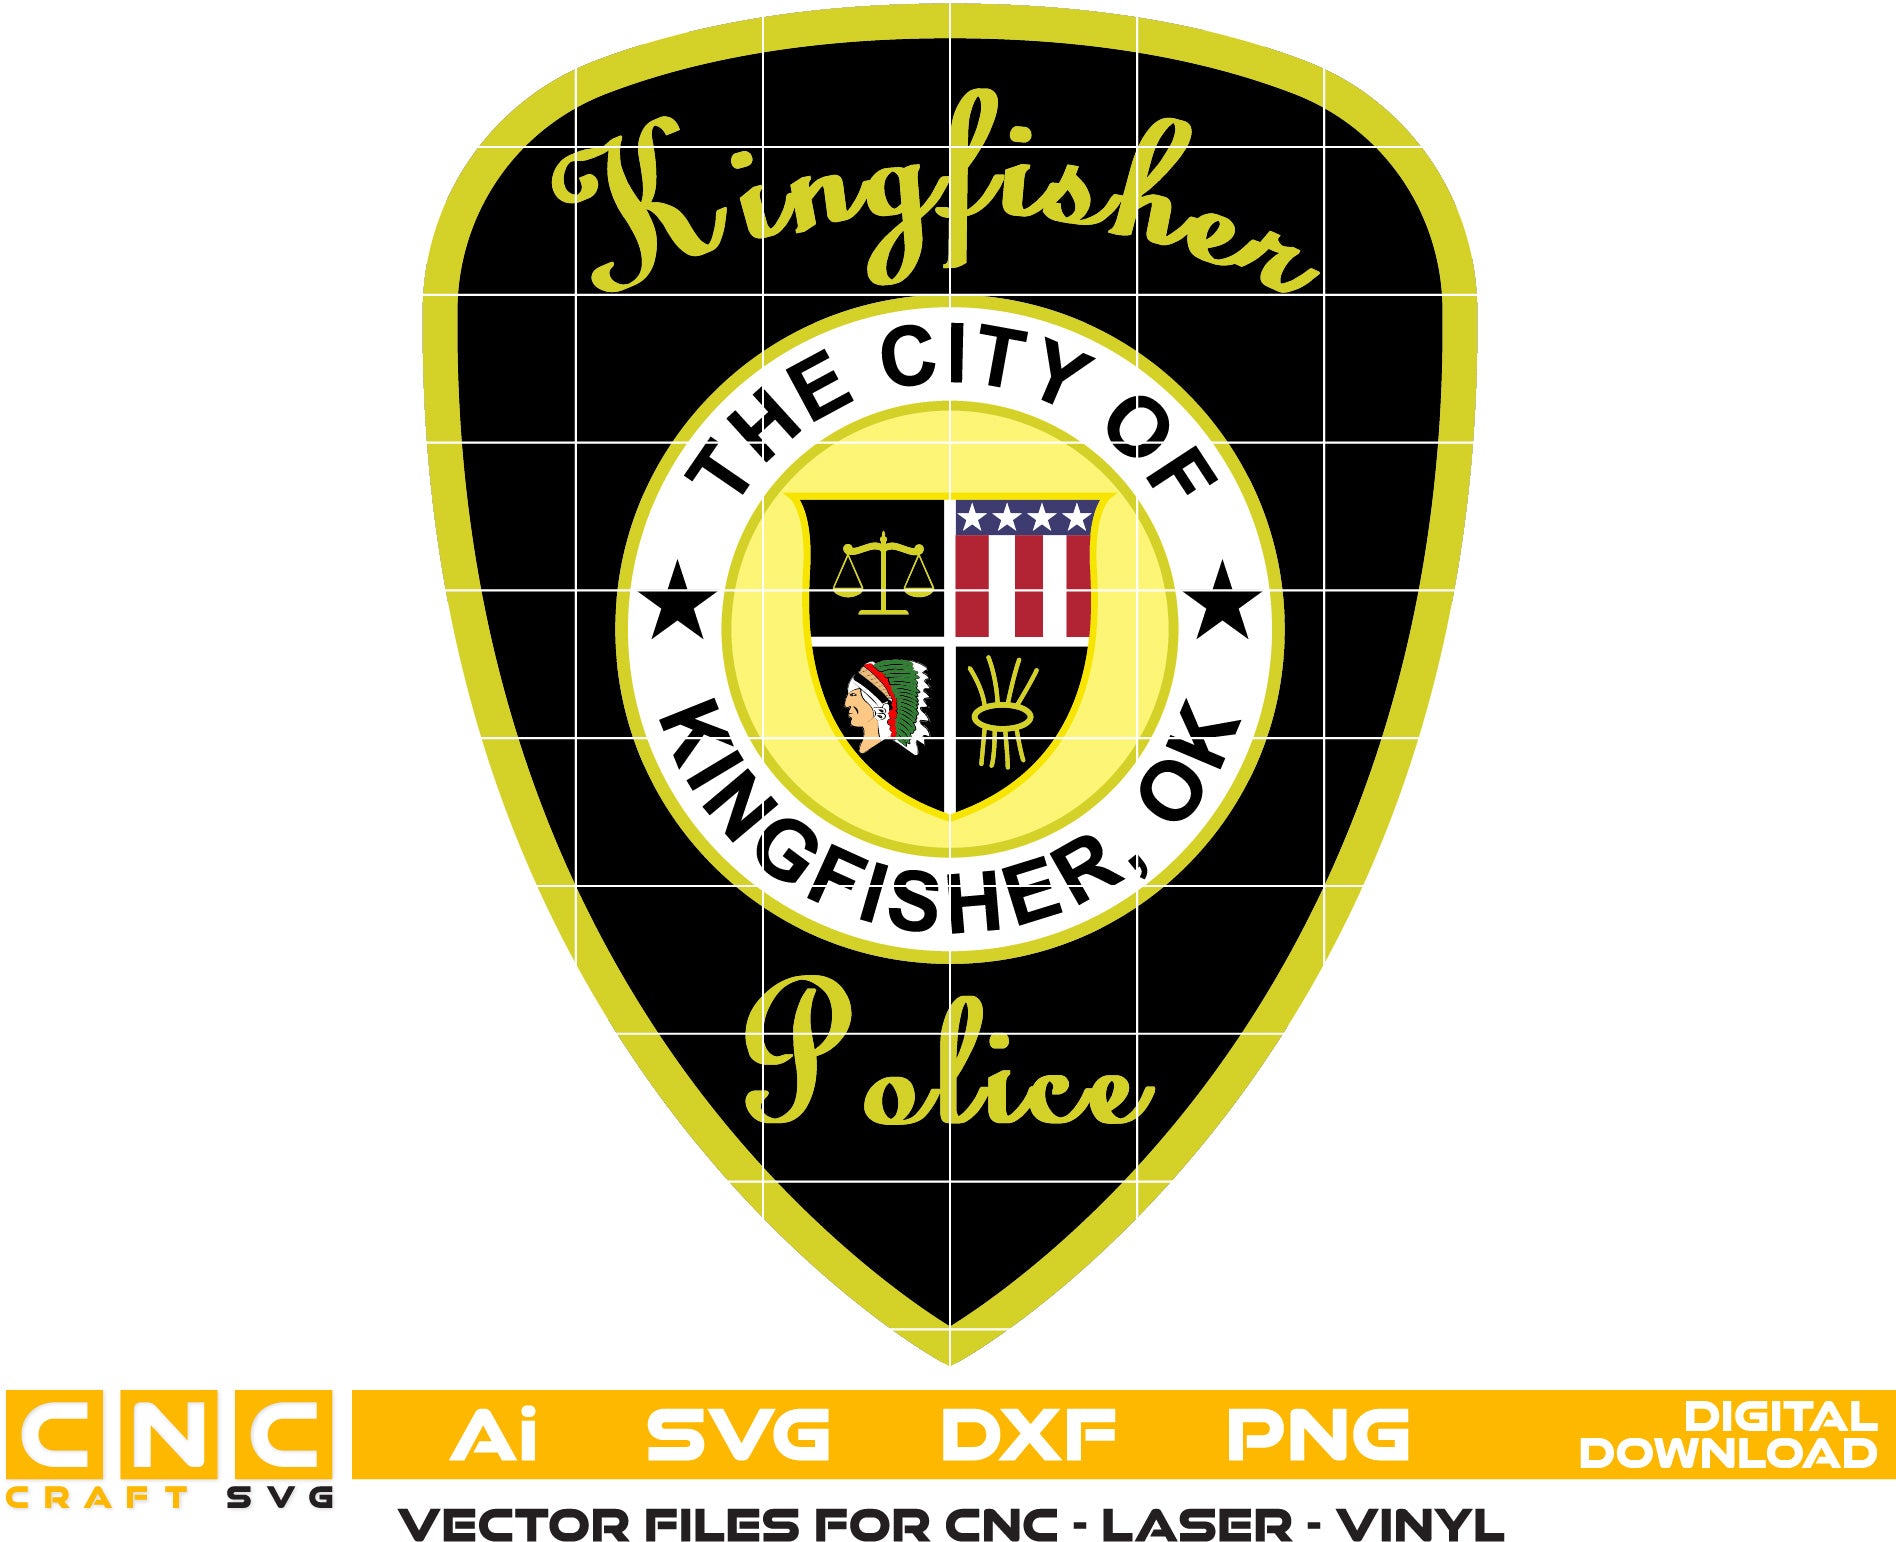 Kingfisher Police Logo vector file for Printing, Laser Engraving, Woodworking, CNC Router, Cricut, Ezecad etc.